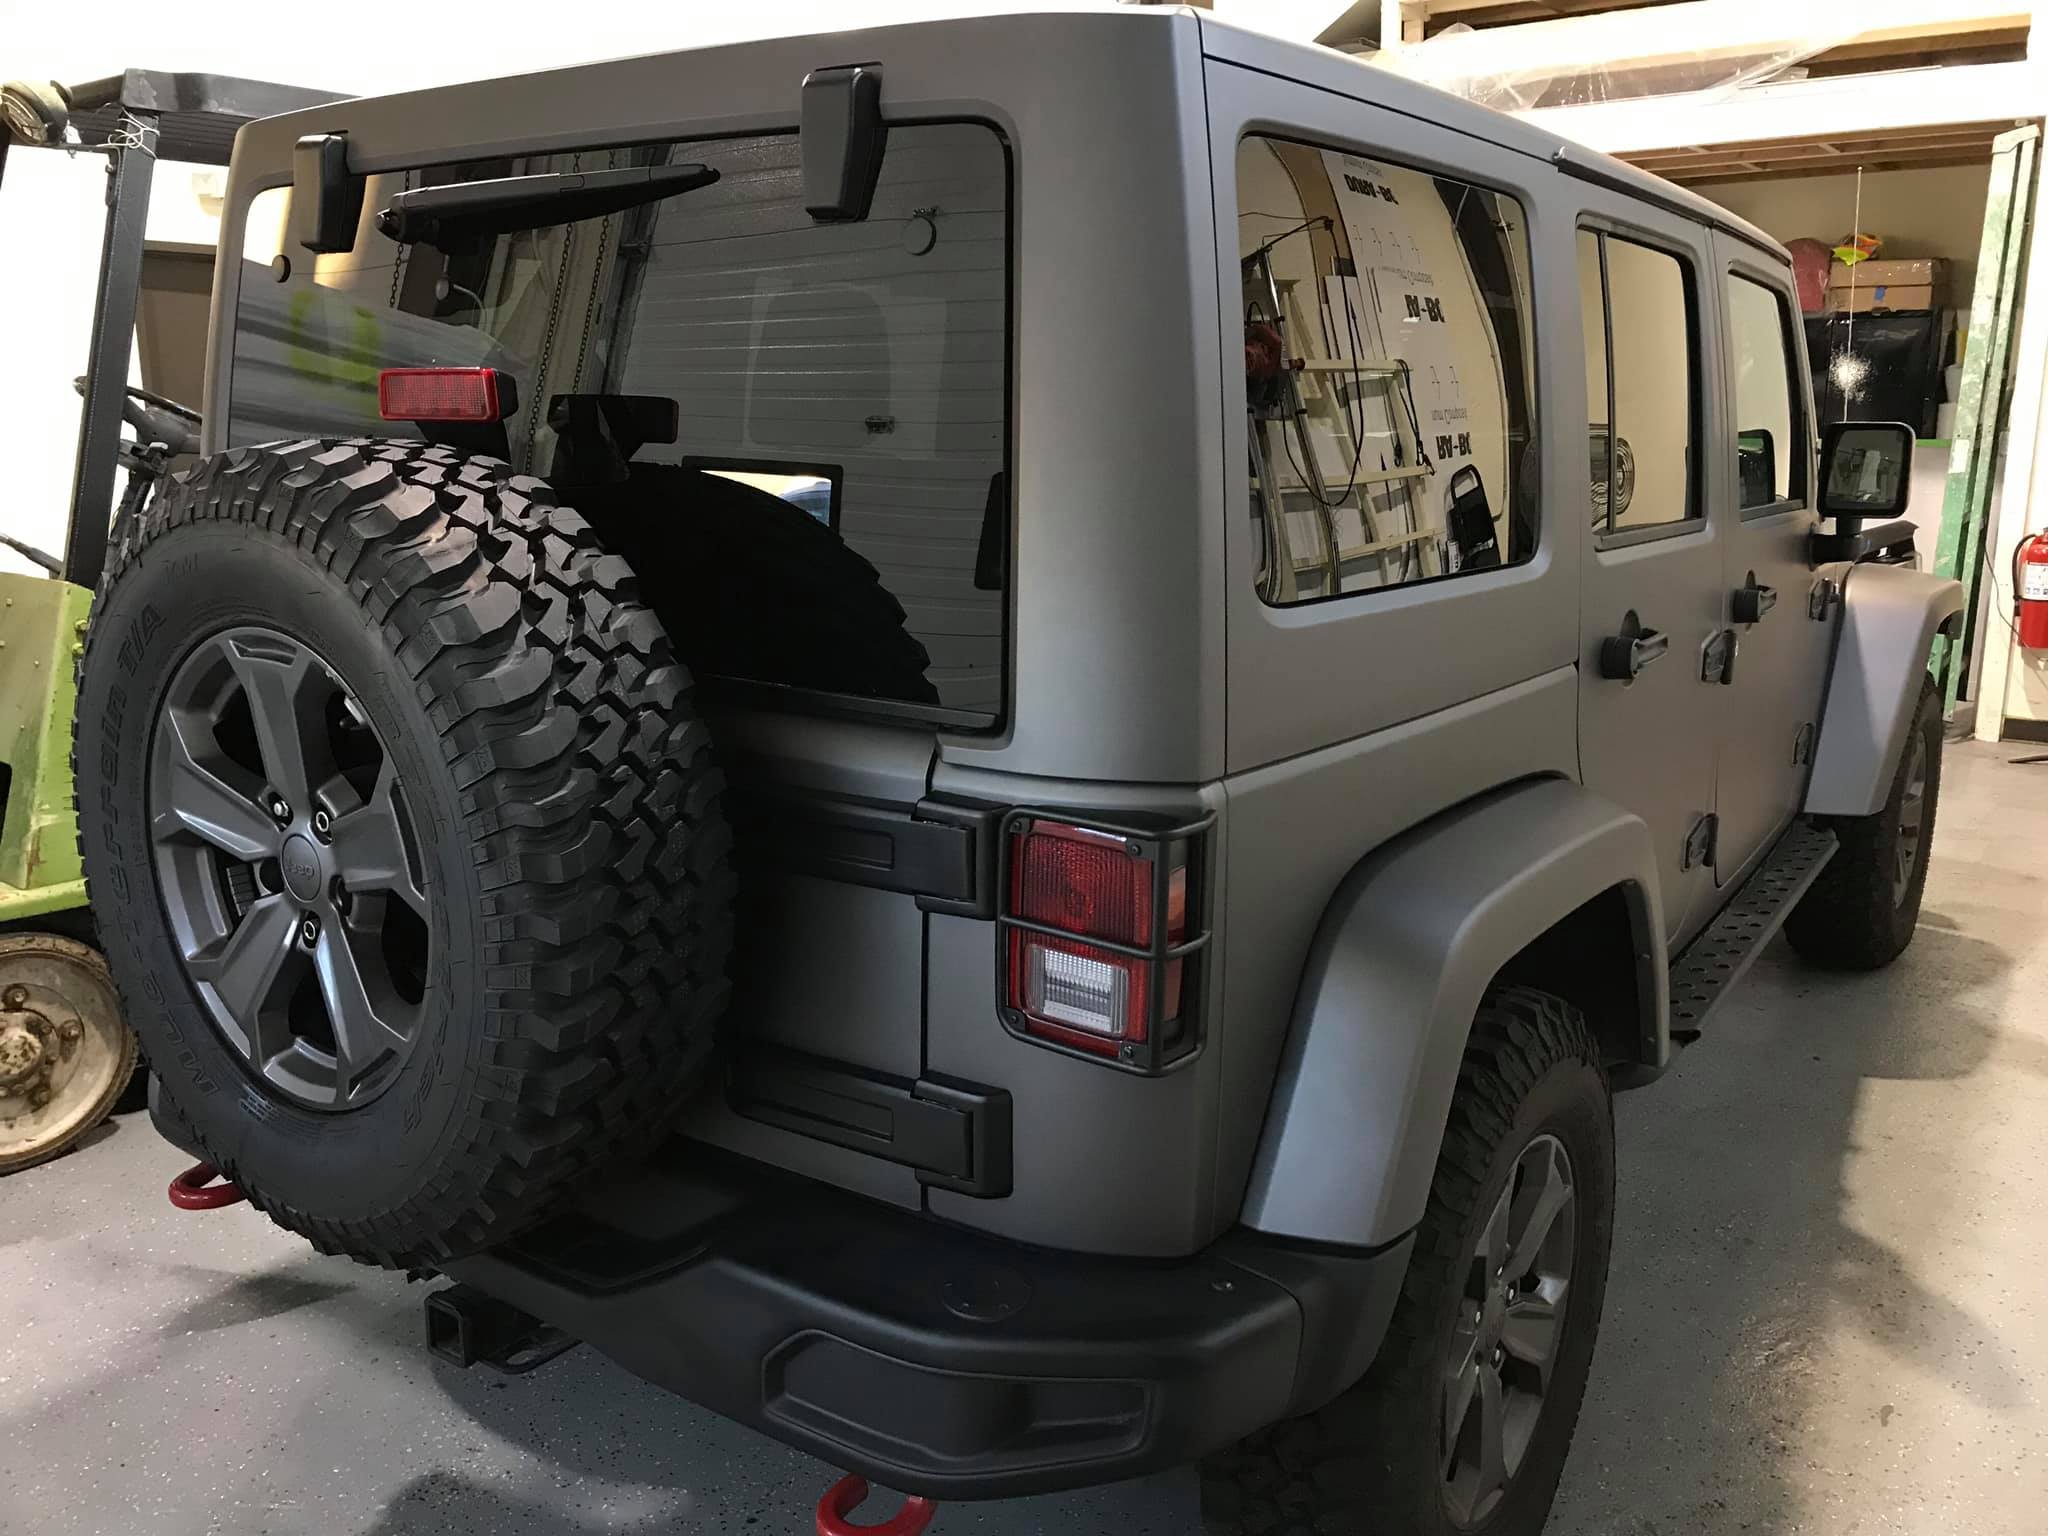 After Jeep SUV Full Matte Wrap @VinniePinstripe 440 N Main St. Port Chester, NY 10573 E.jpg